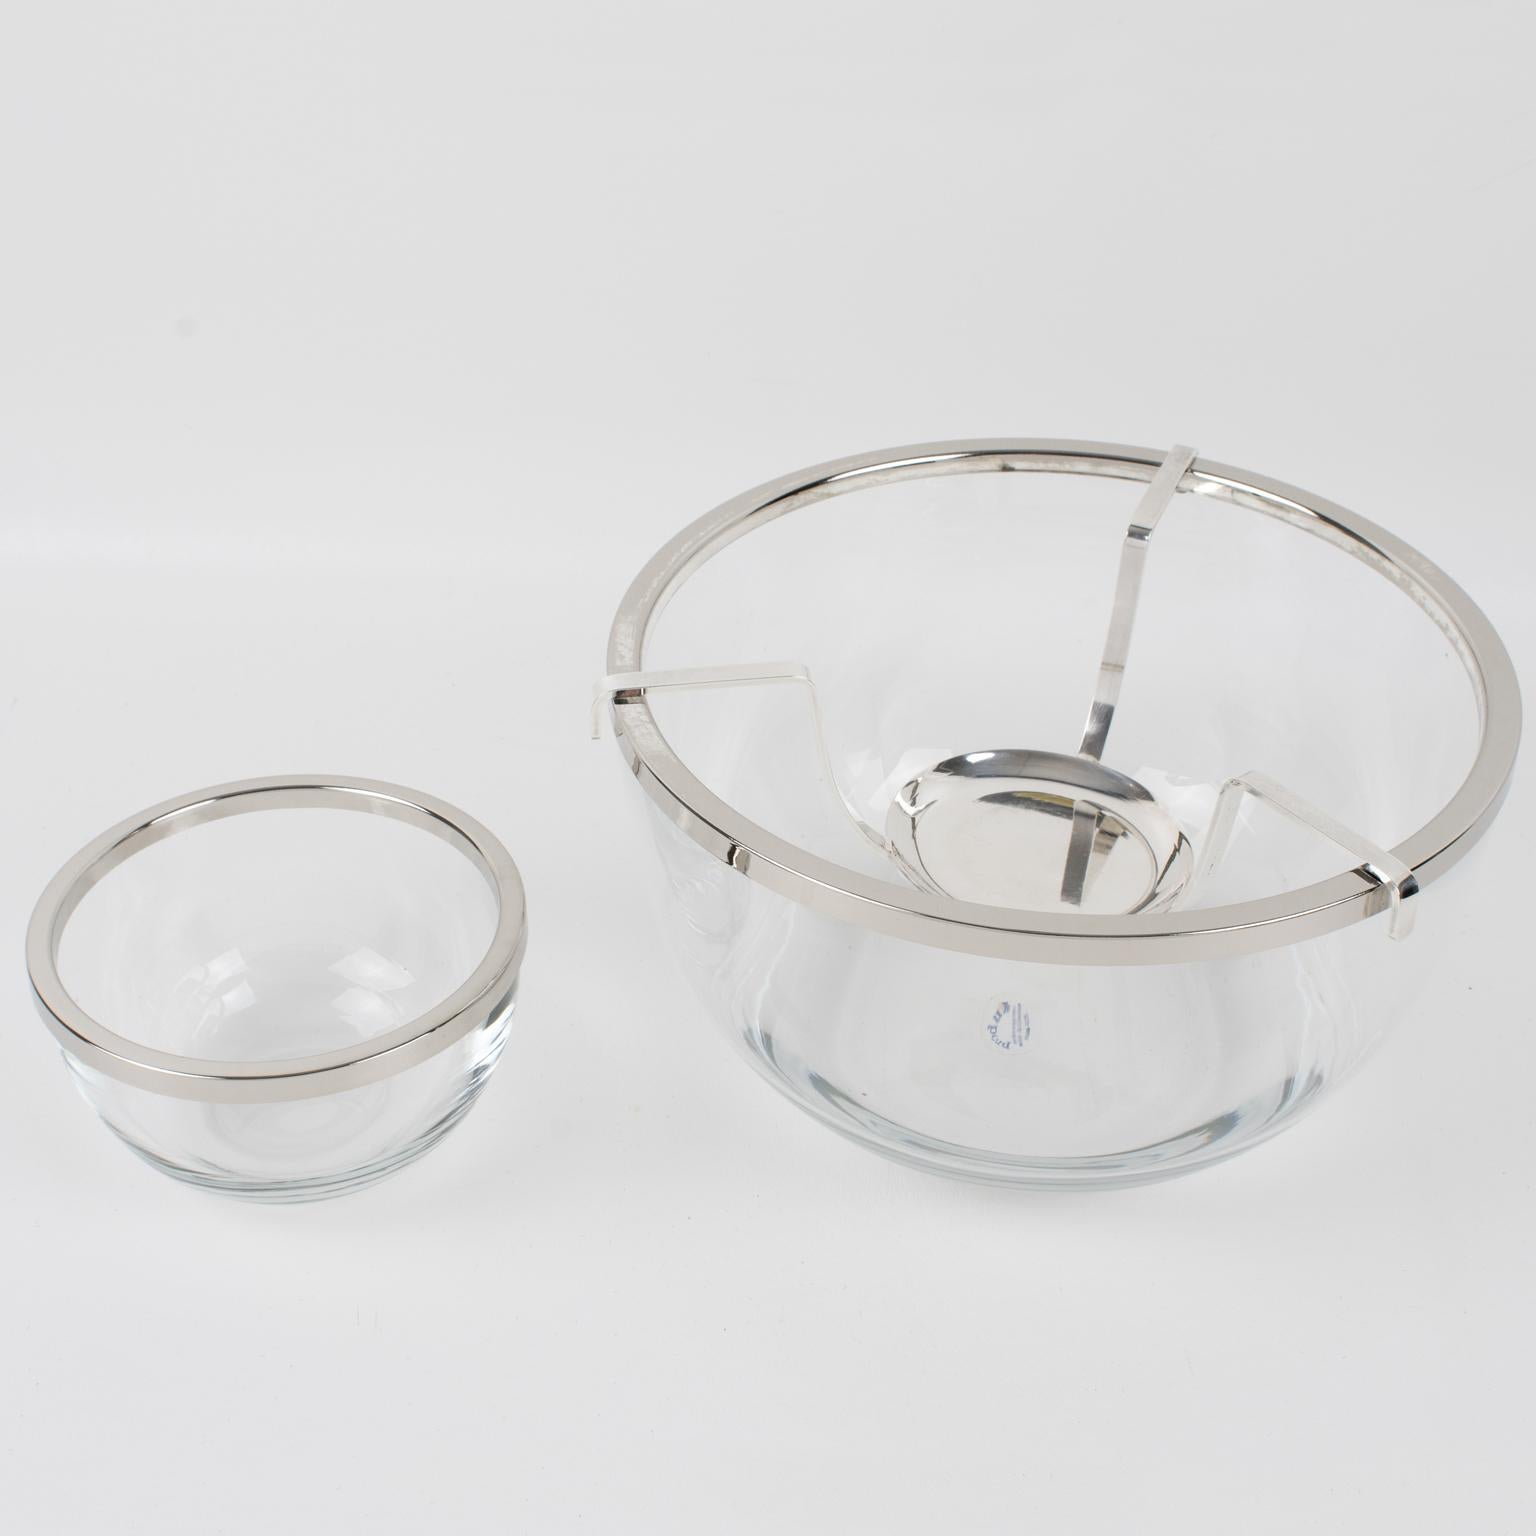 Late 20th Century French Silver Plate and Crystal Caviar Bowl Dish Server by Produx Paris